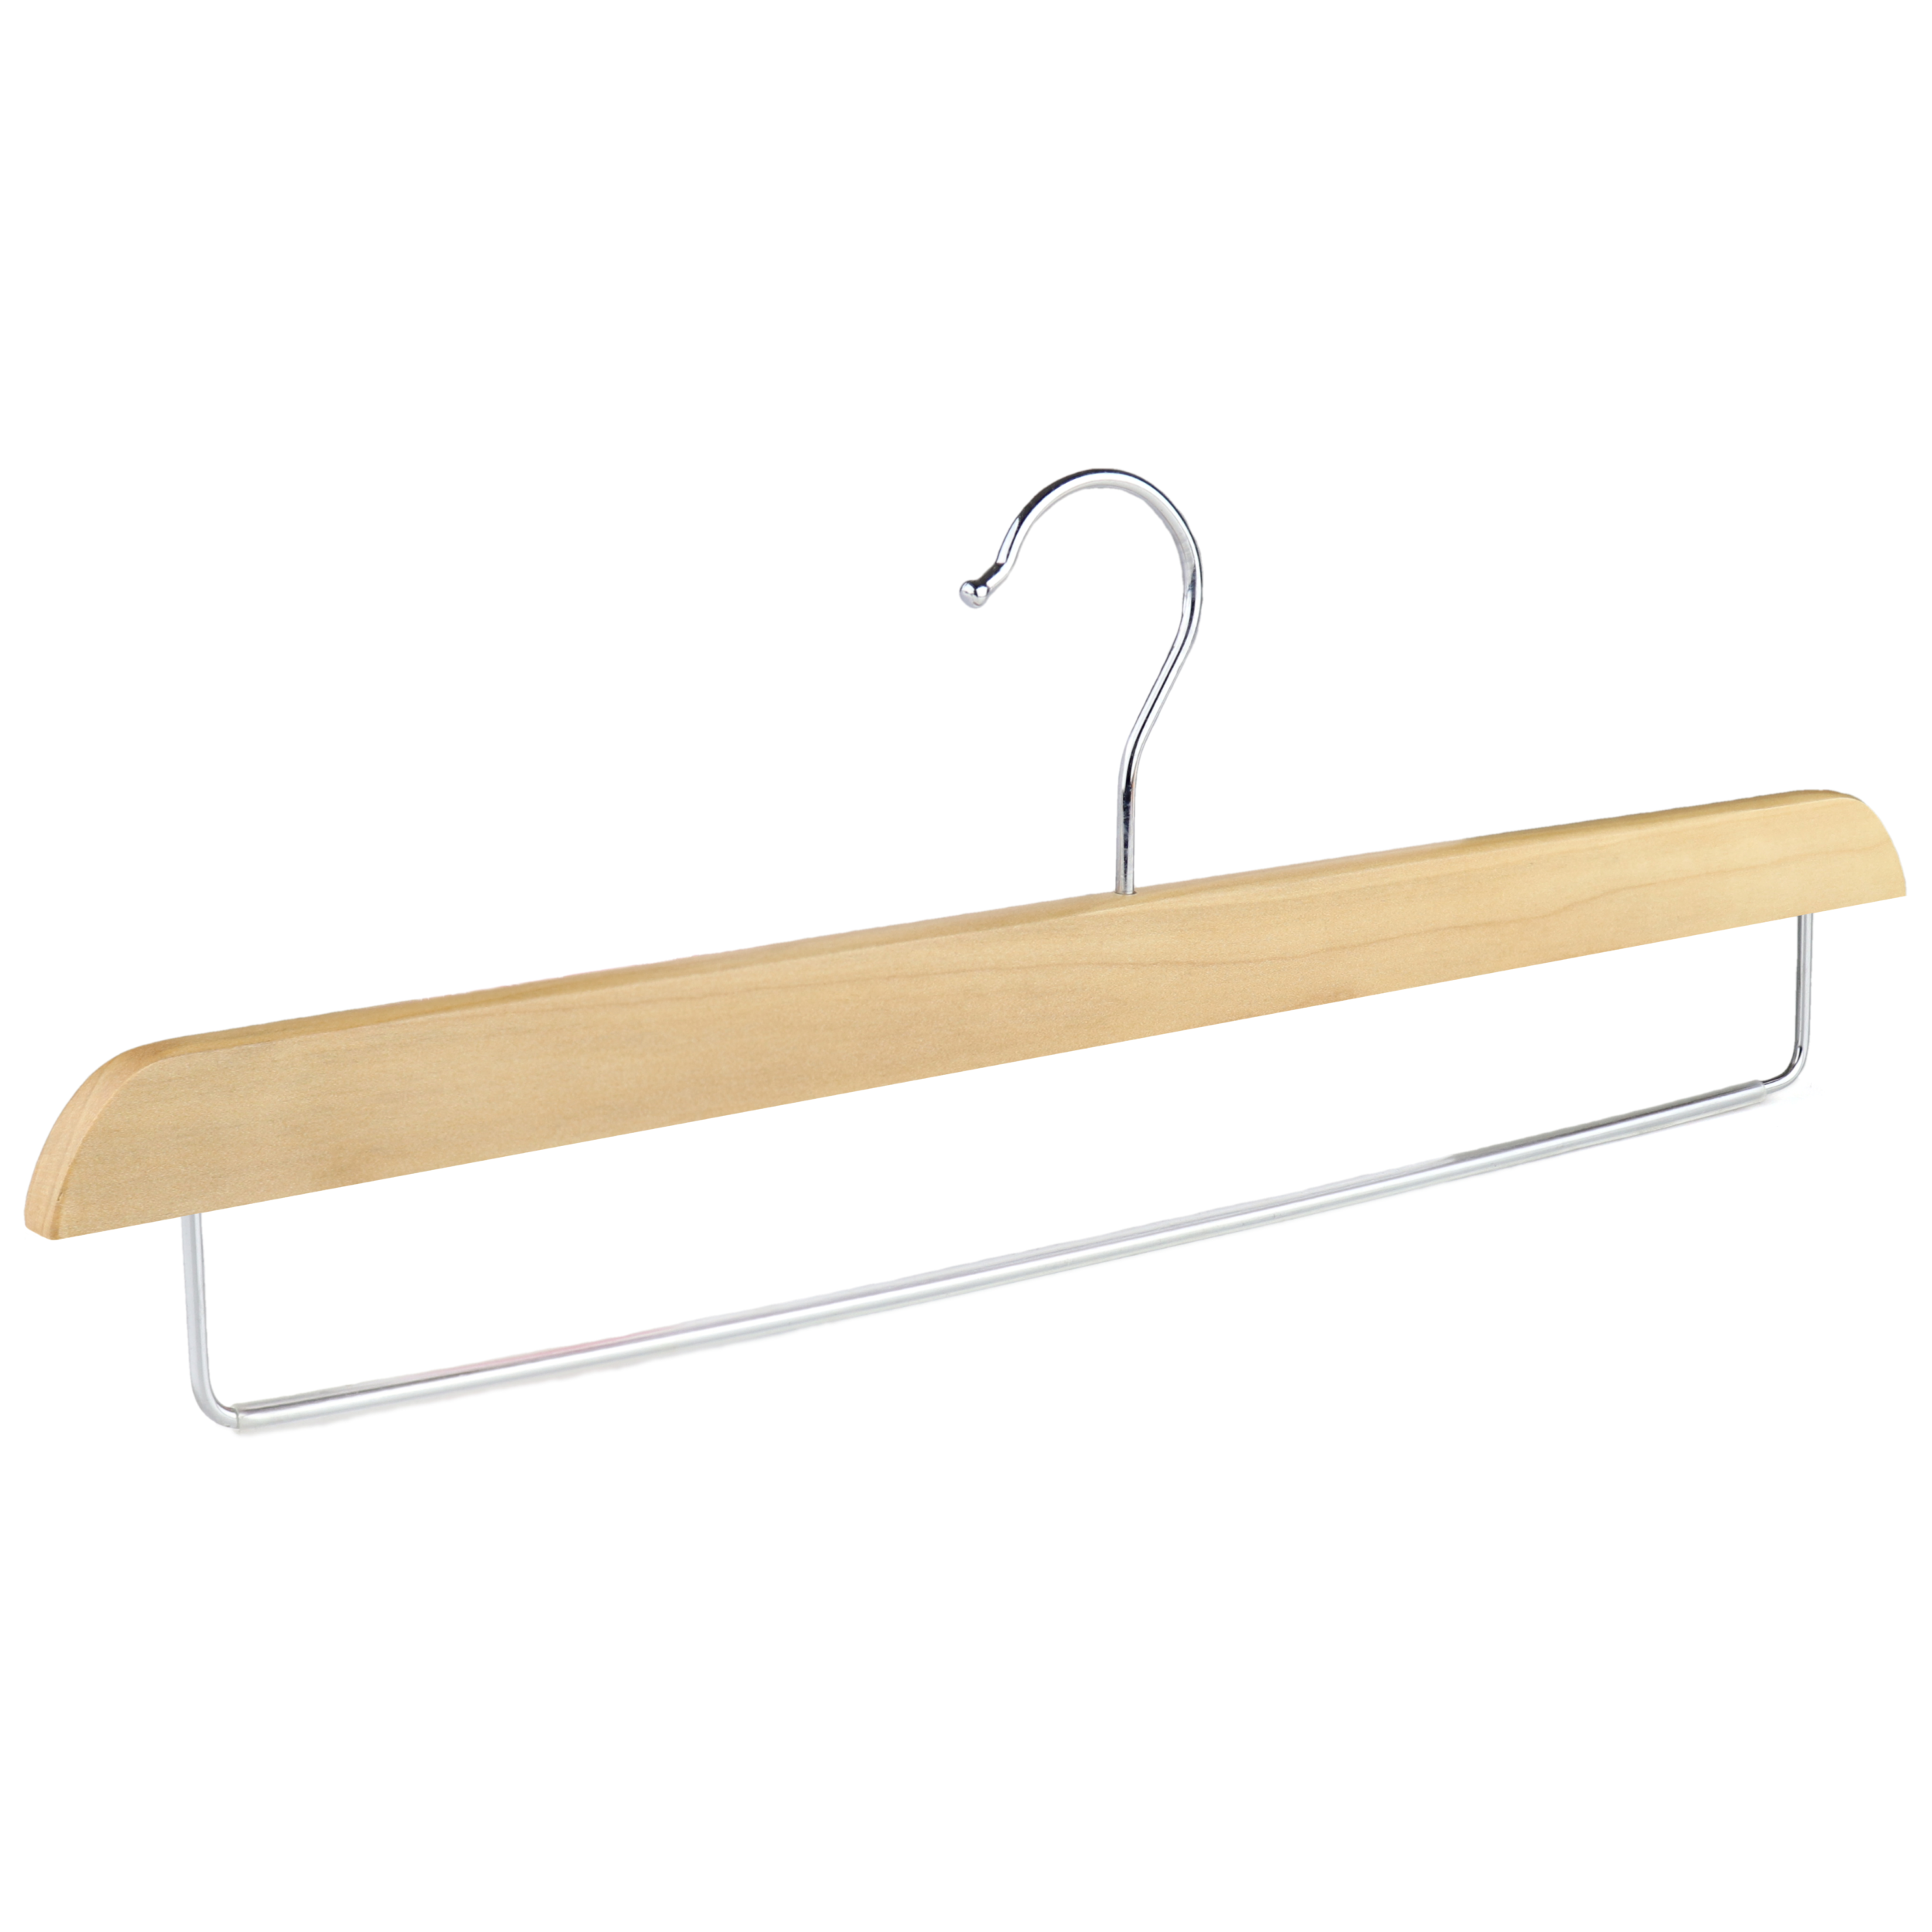 Wholesale 5pcslot 24cm44cm Wood Hangers Black Solid Clothes Hanger Trousers RackAnti Slip Gold Hook Hanger From malibabacom